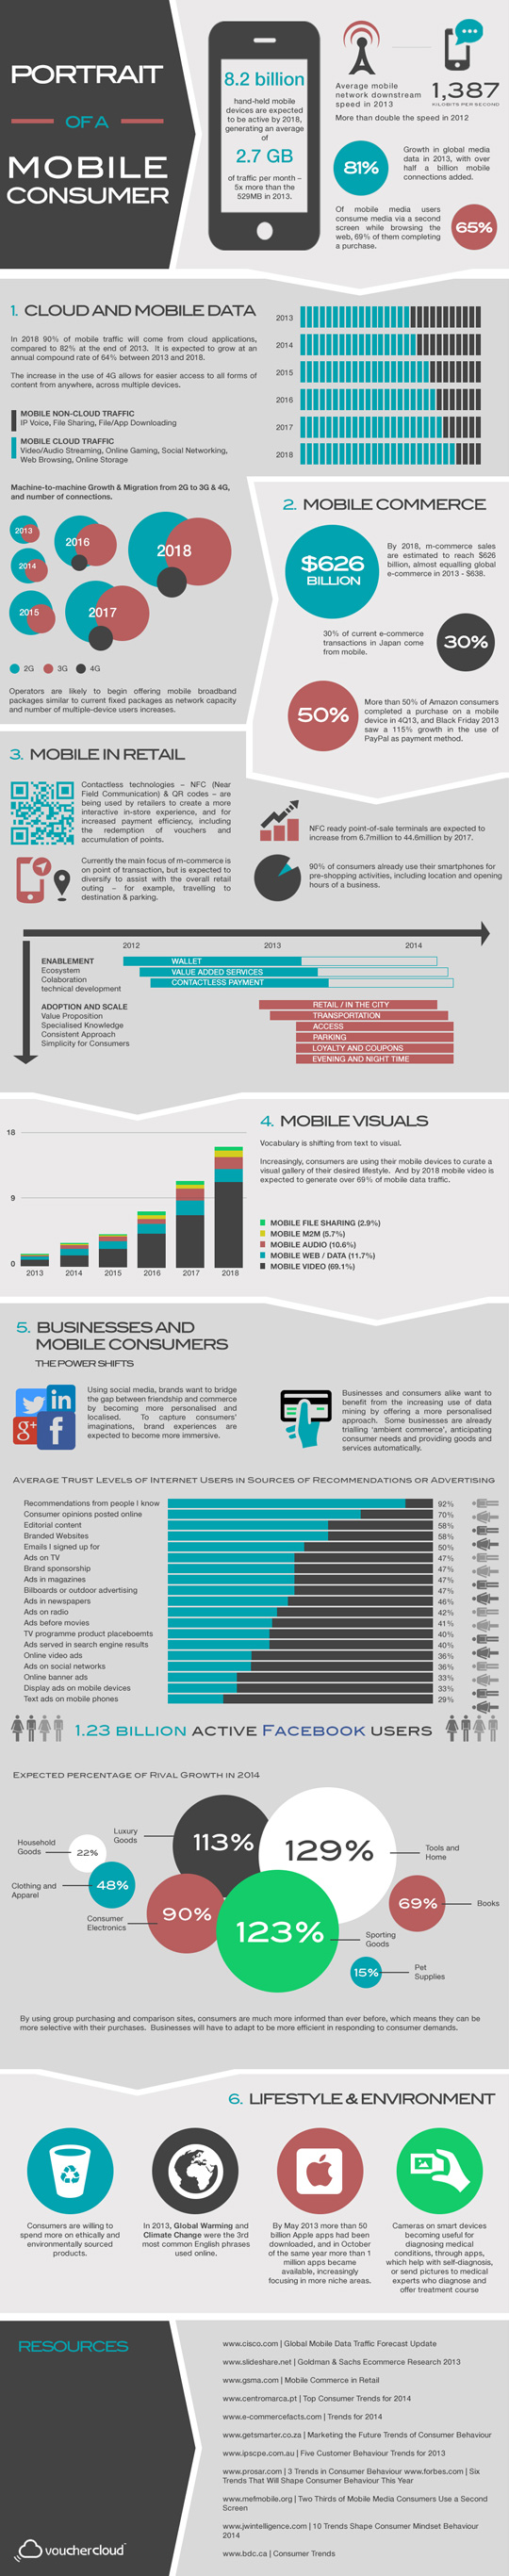 Portrait Of A Mobile Consumer [Infographic]